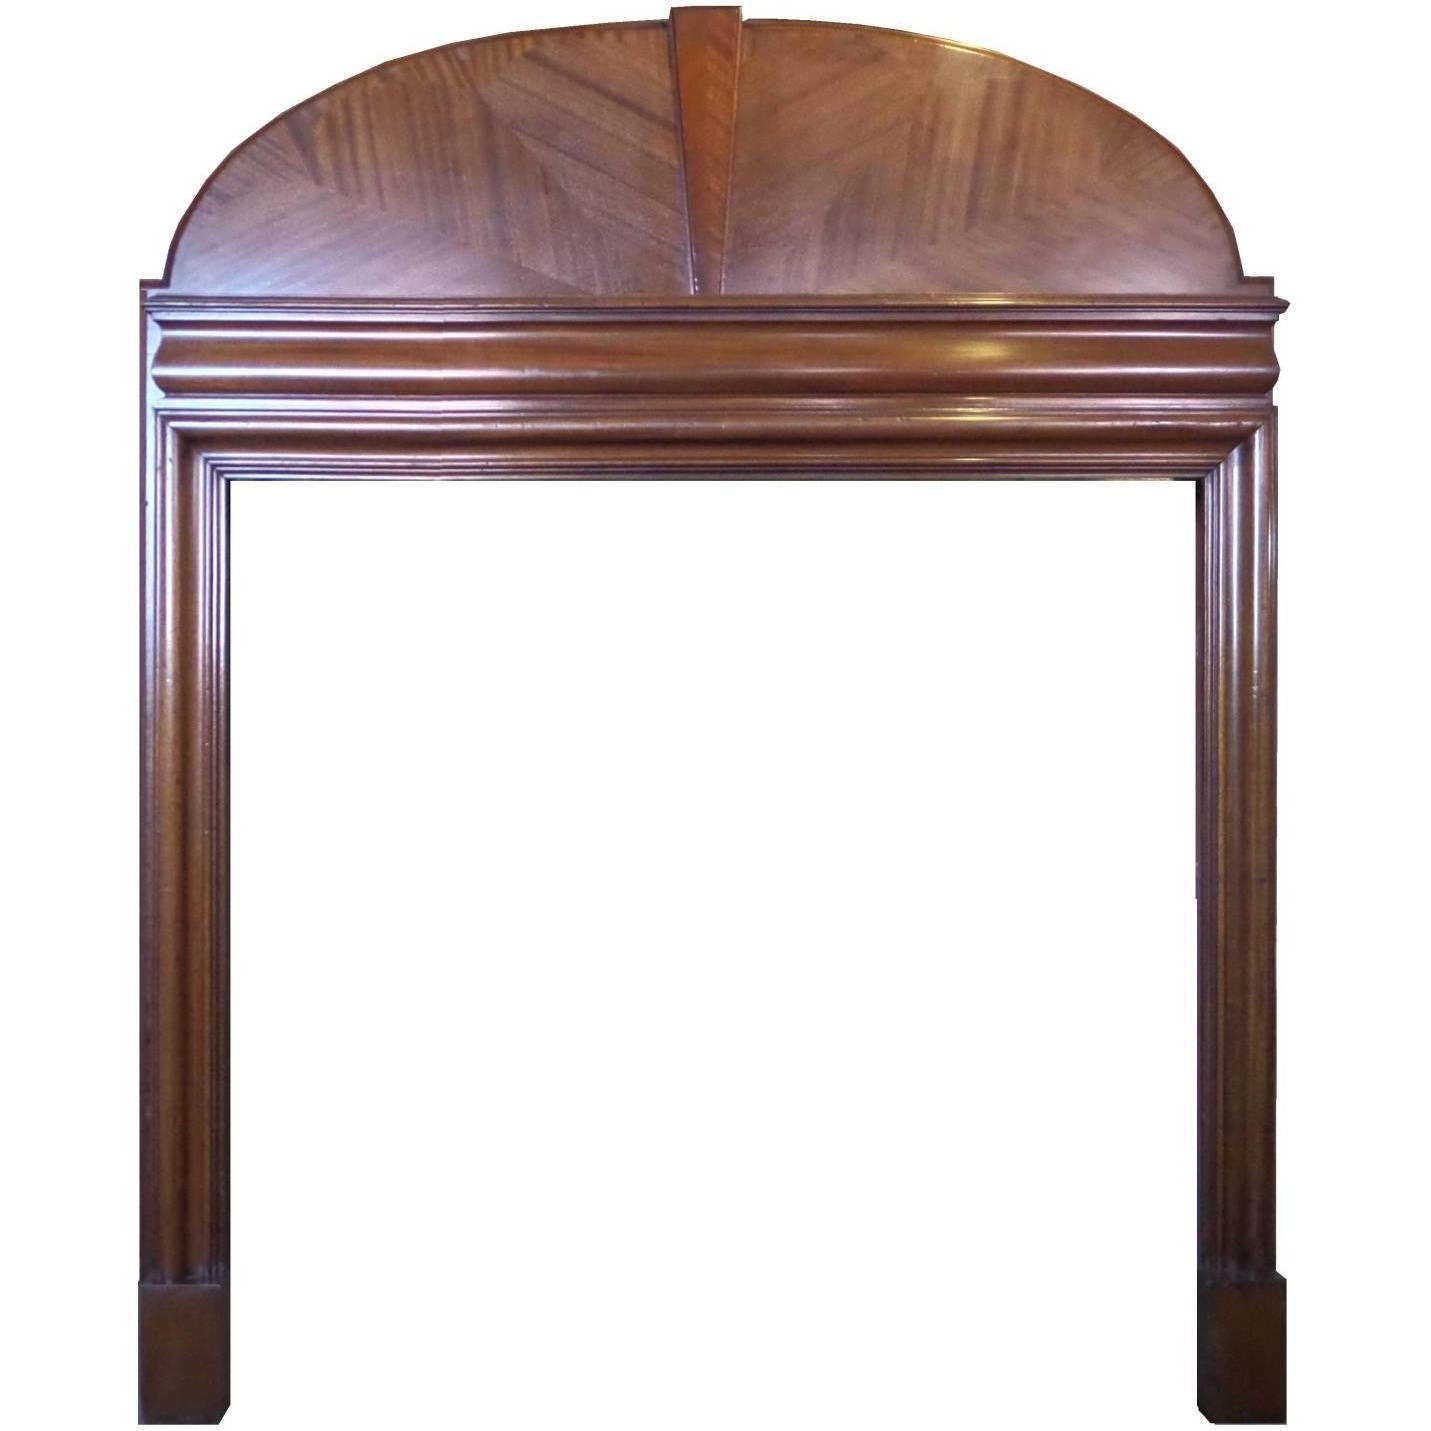 Art Deco, 1930s Mahogany Wood Mantel Fireplace Surround For Sale